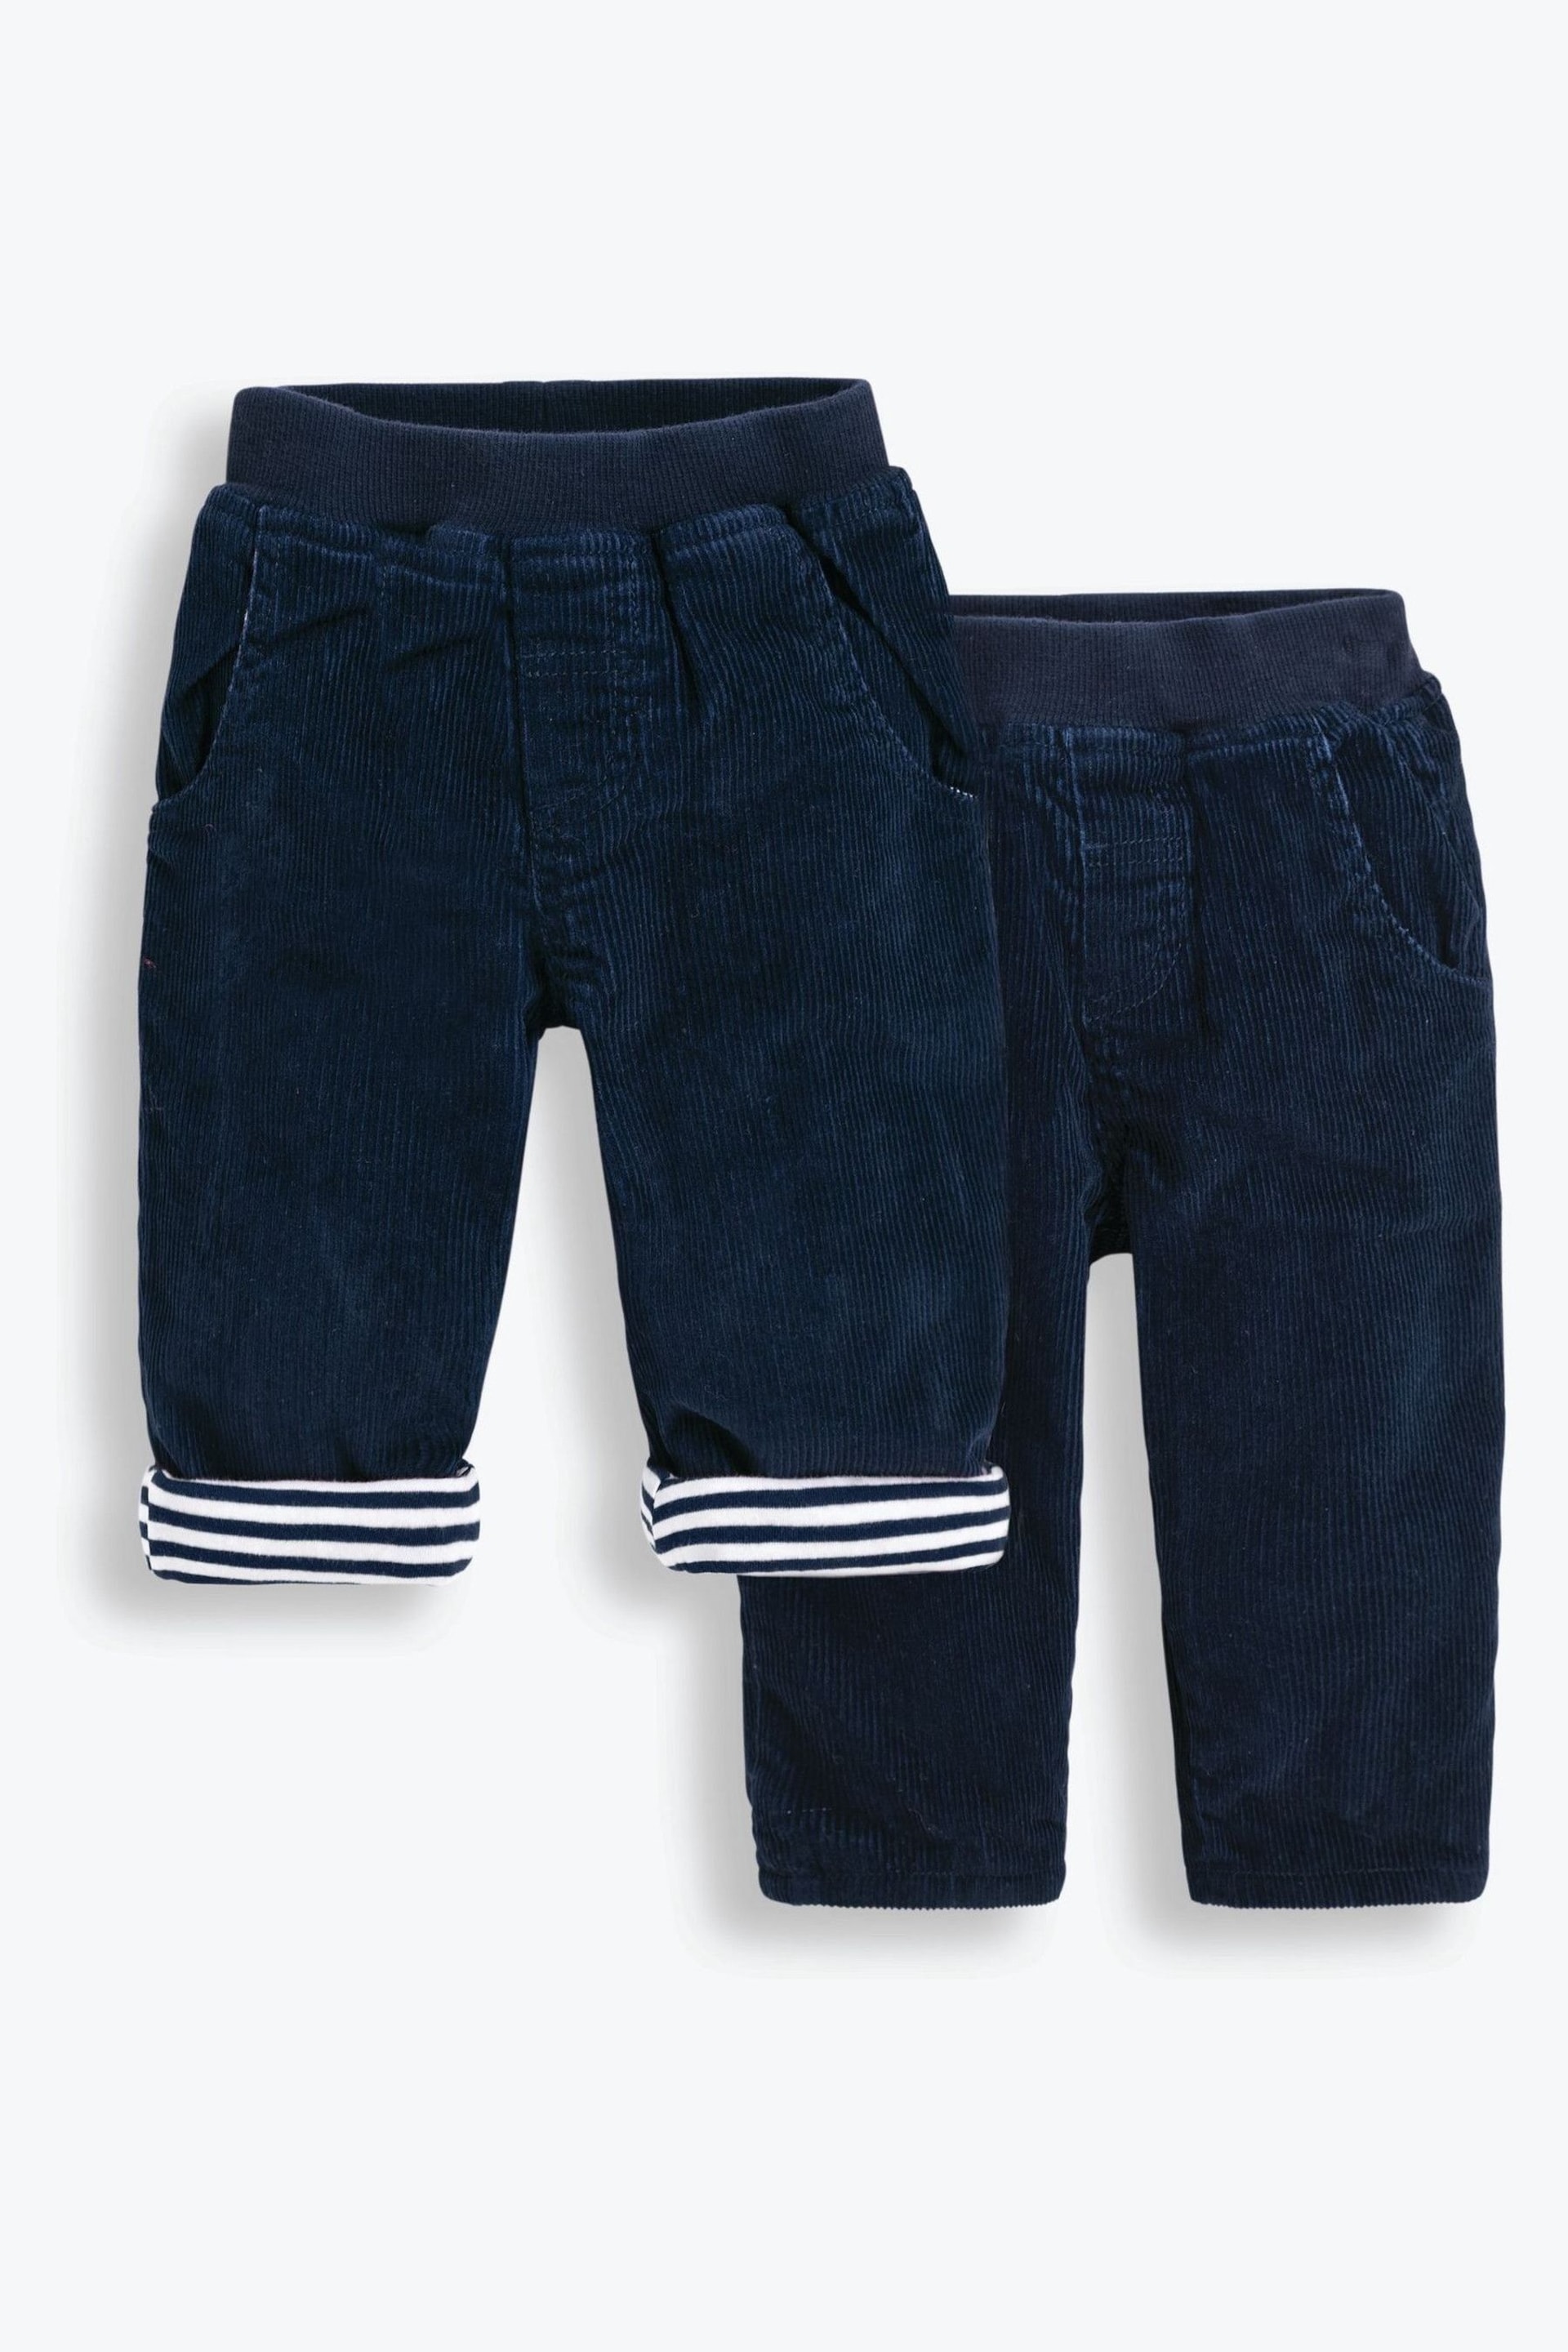 JoJo Maman Bébé Navy Cord Baby Pull-Up Trousers - Image 1 of 3